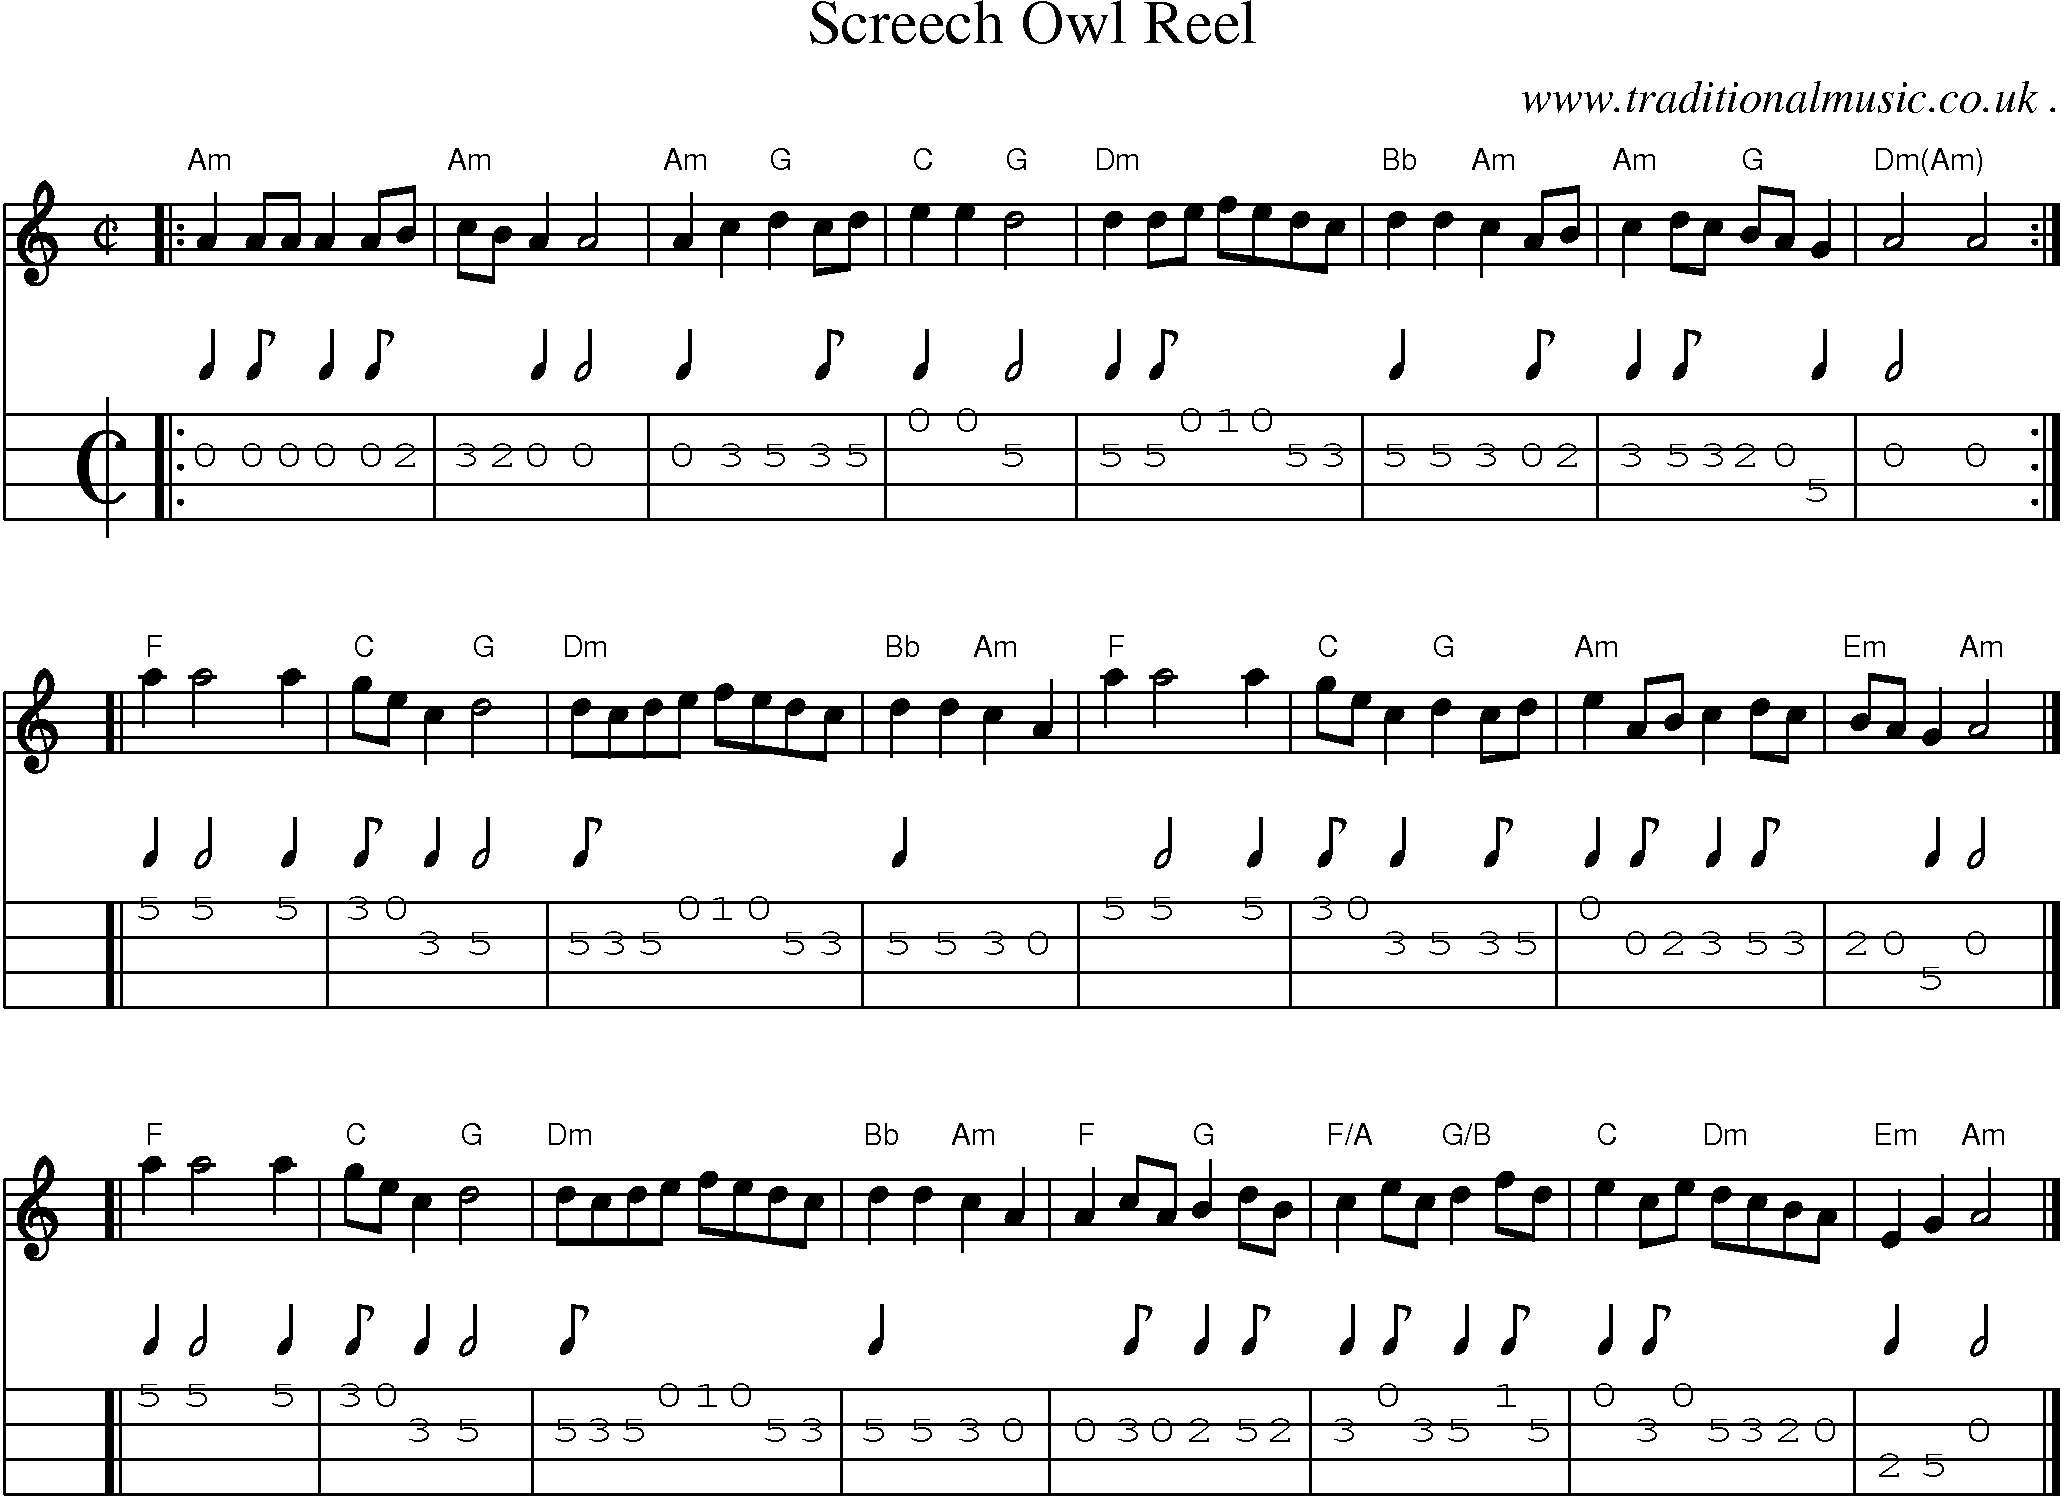 Sheet-music  score, Chords and Mandolin Tabs for Screech Owl Reel